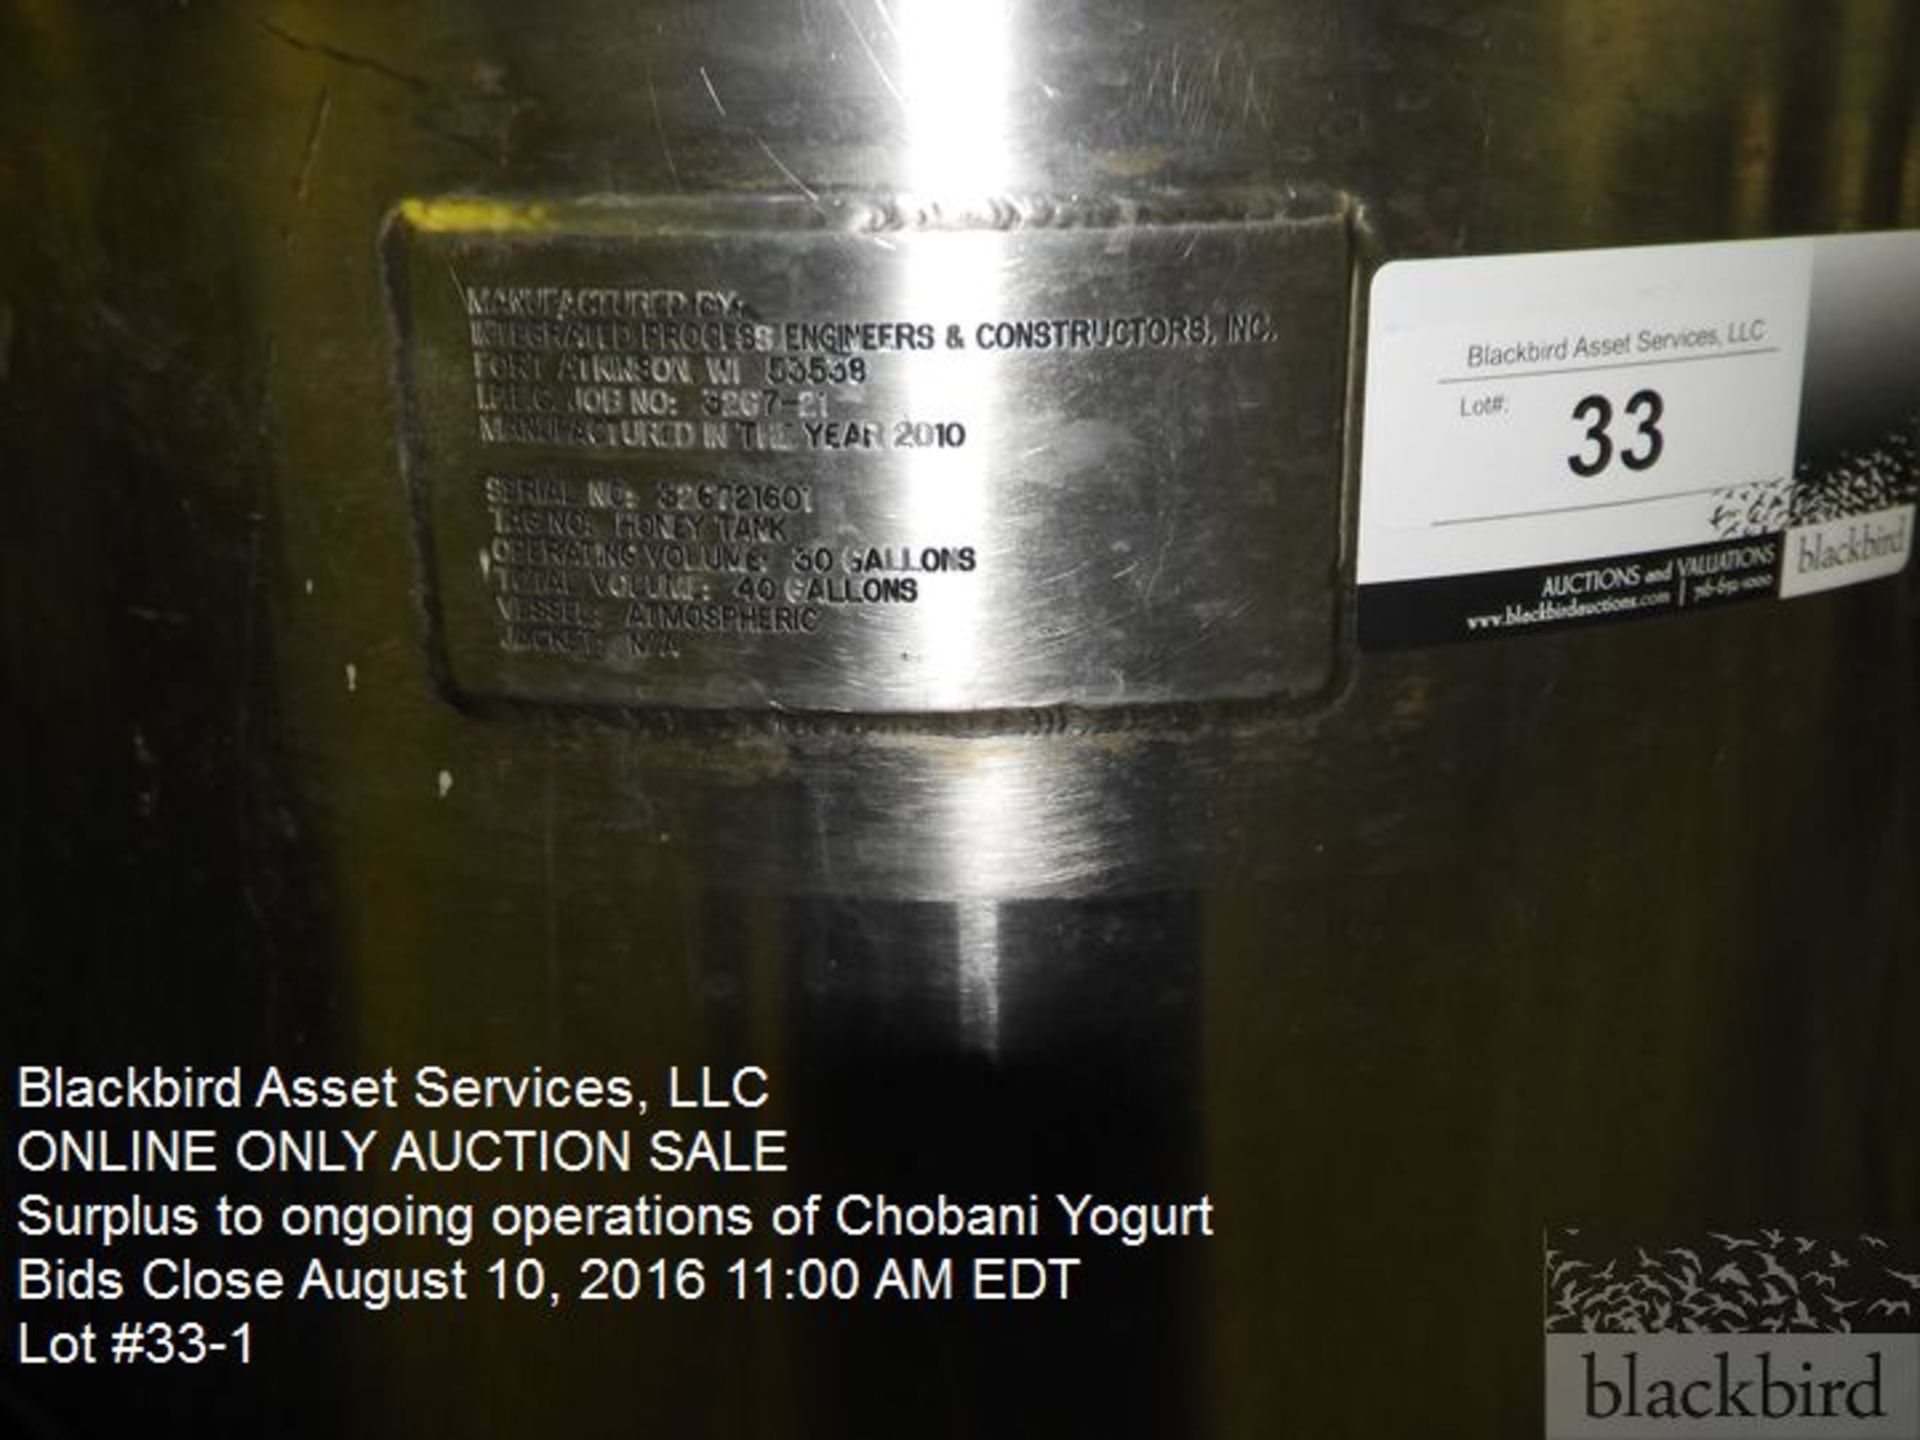 Integrated Process balance tank, stainless steel 40 gallon, "honey tank", s/n 326721601, 2010, non - Image 2 of 3